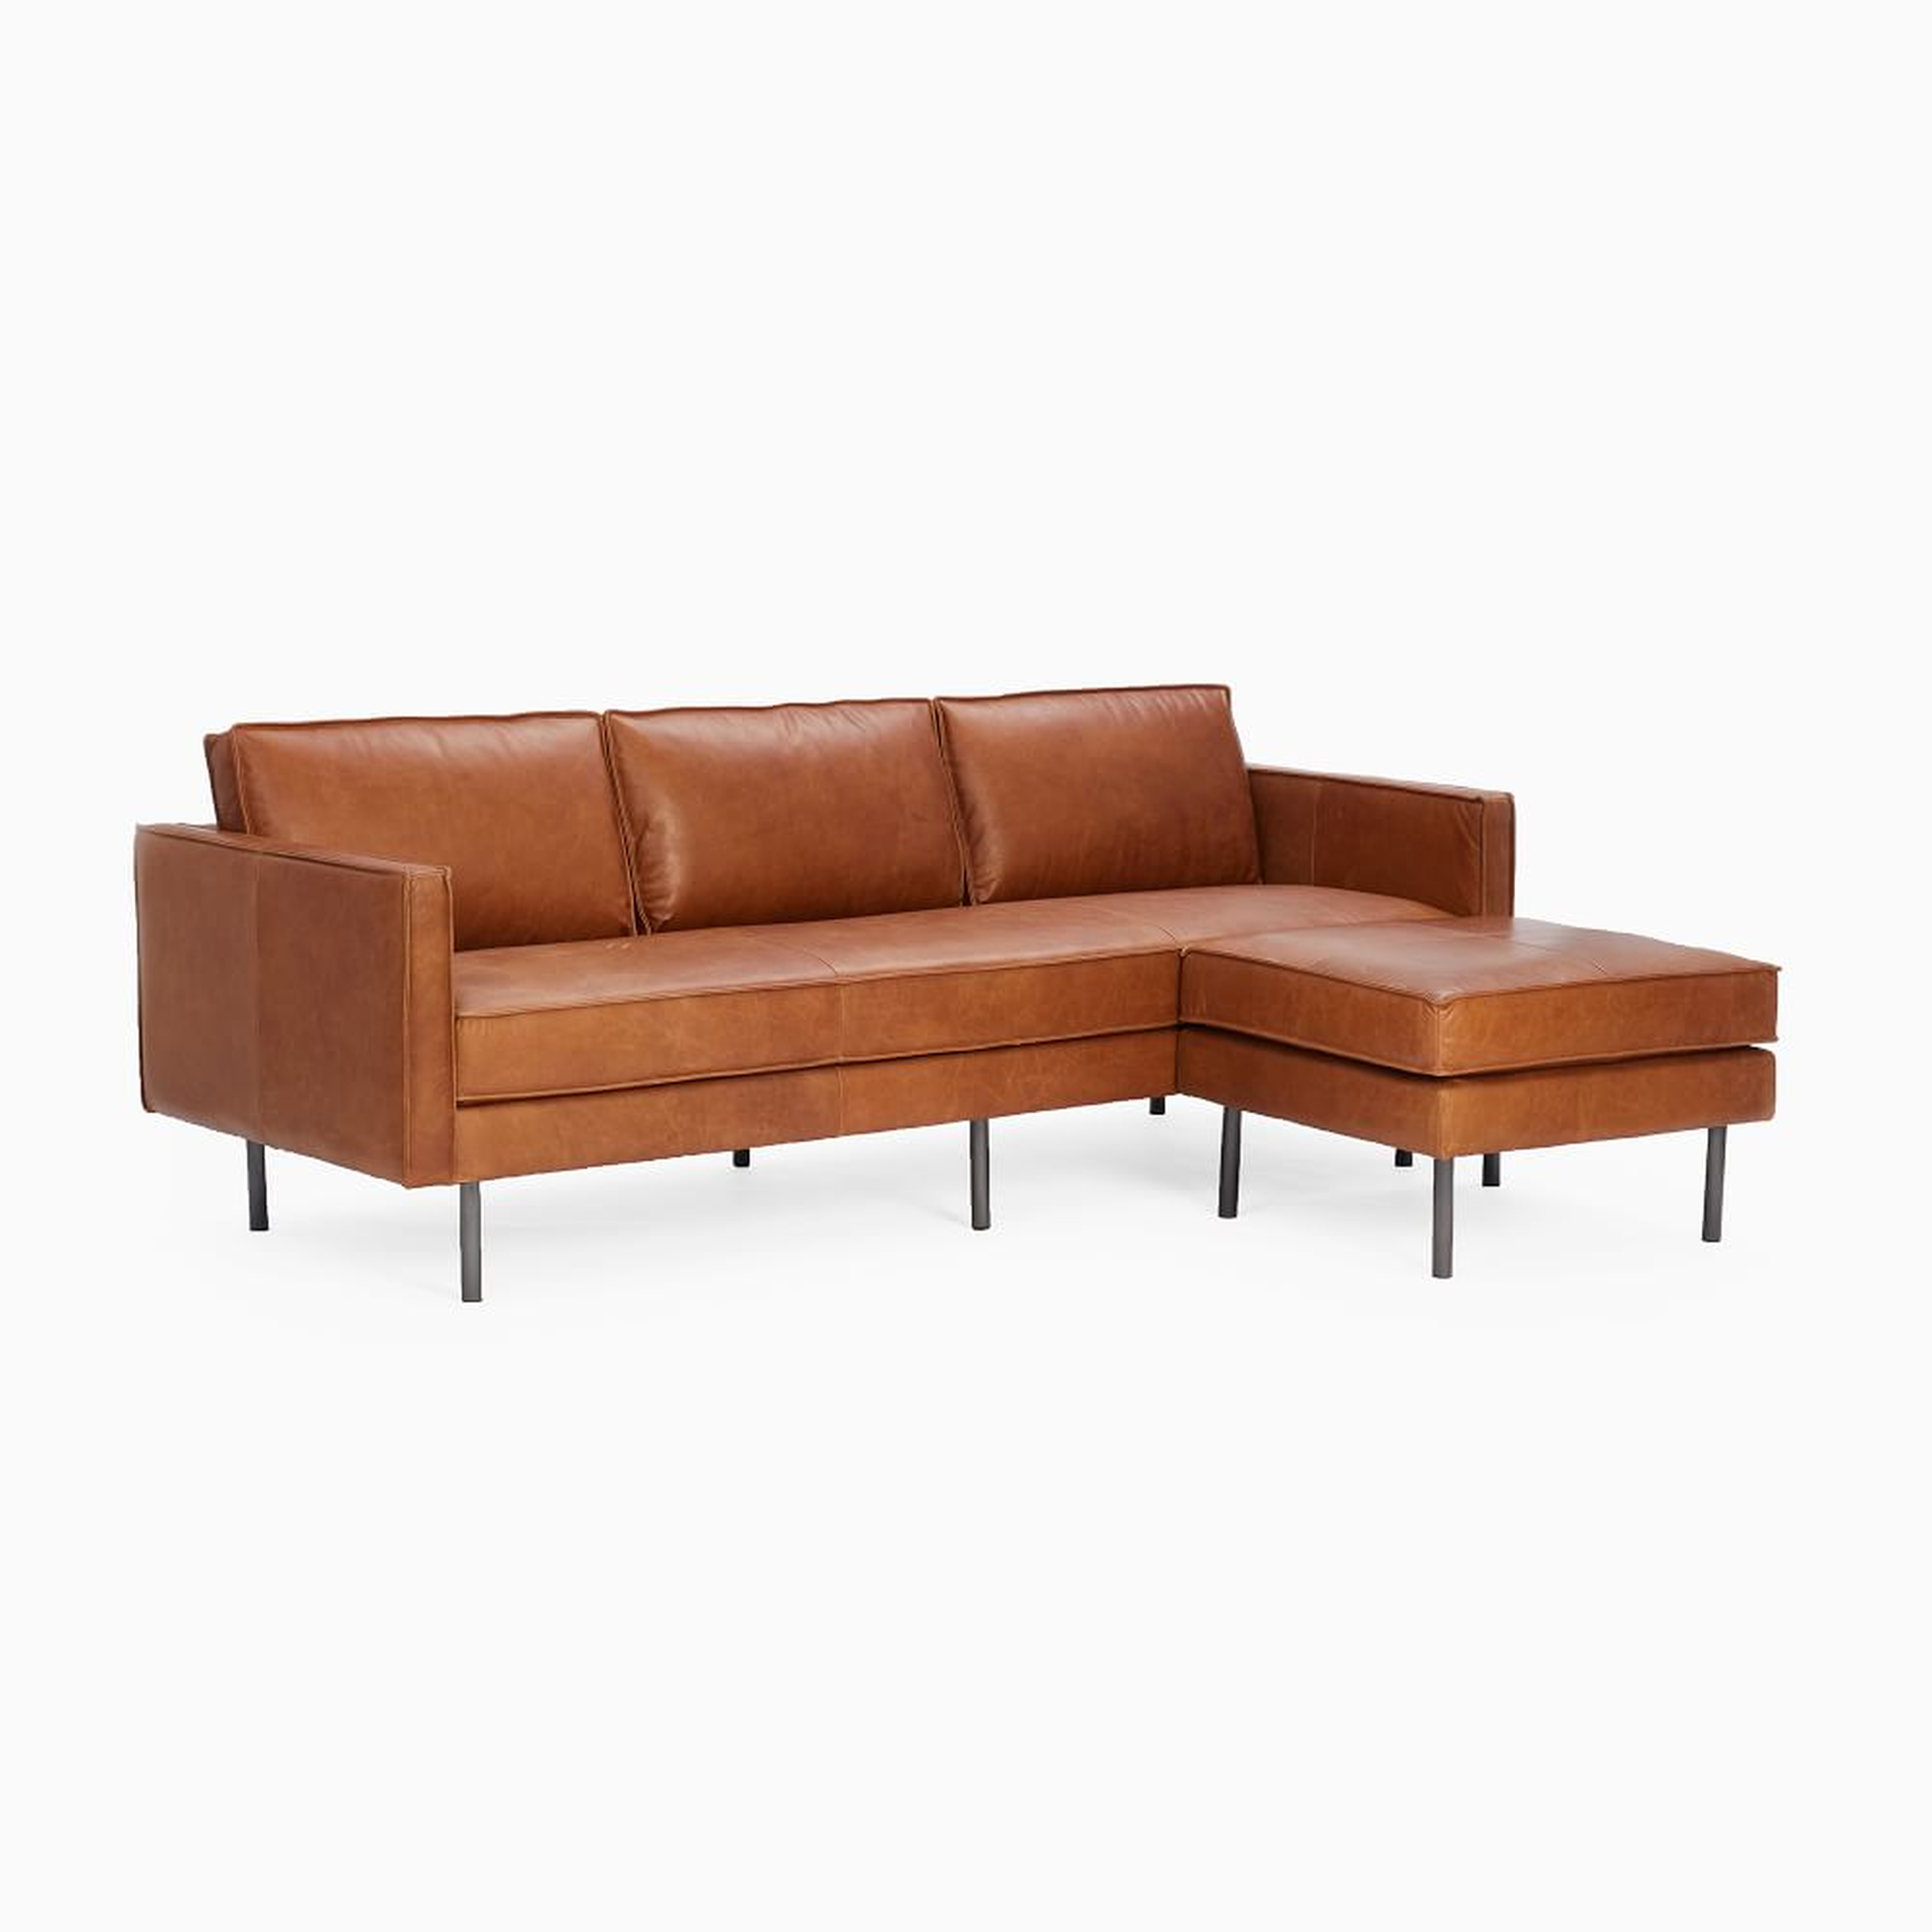 Axel 89" Reversible Sectional, Saddle Leather, Nut, Metal - West Elm